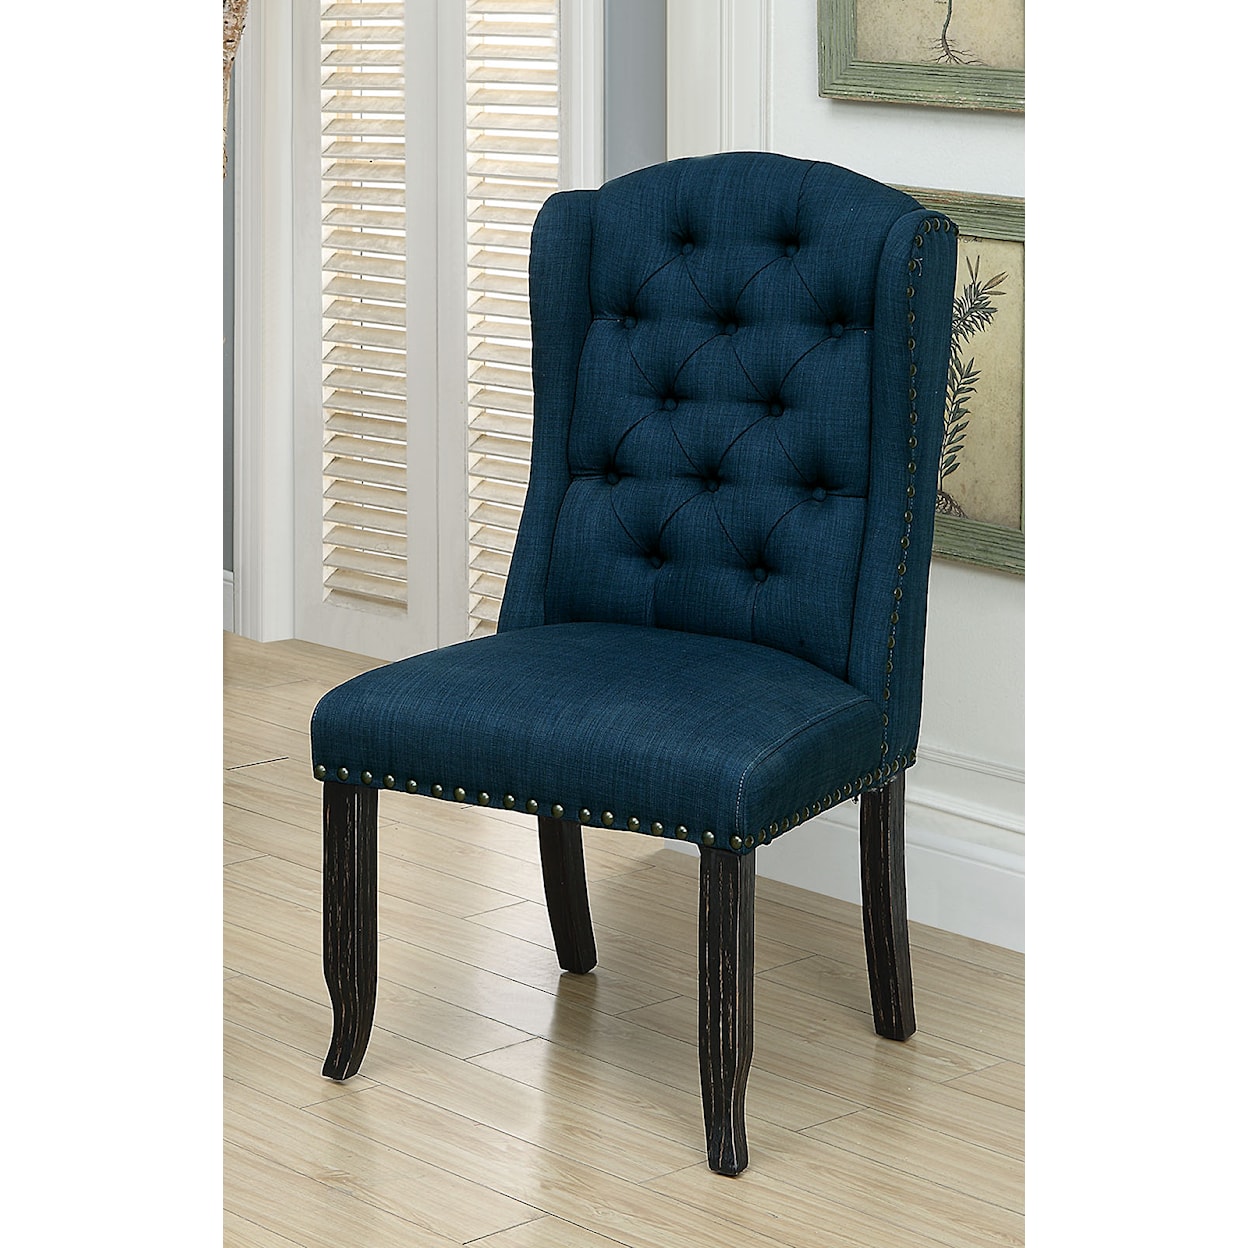 Furniture of America Sania Wing Back Chair